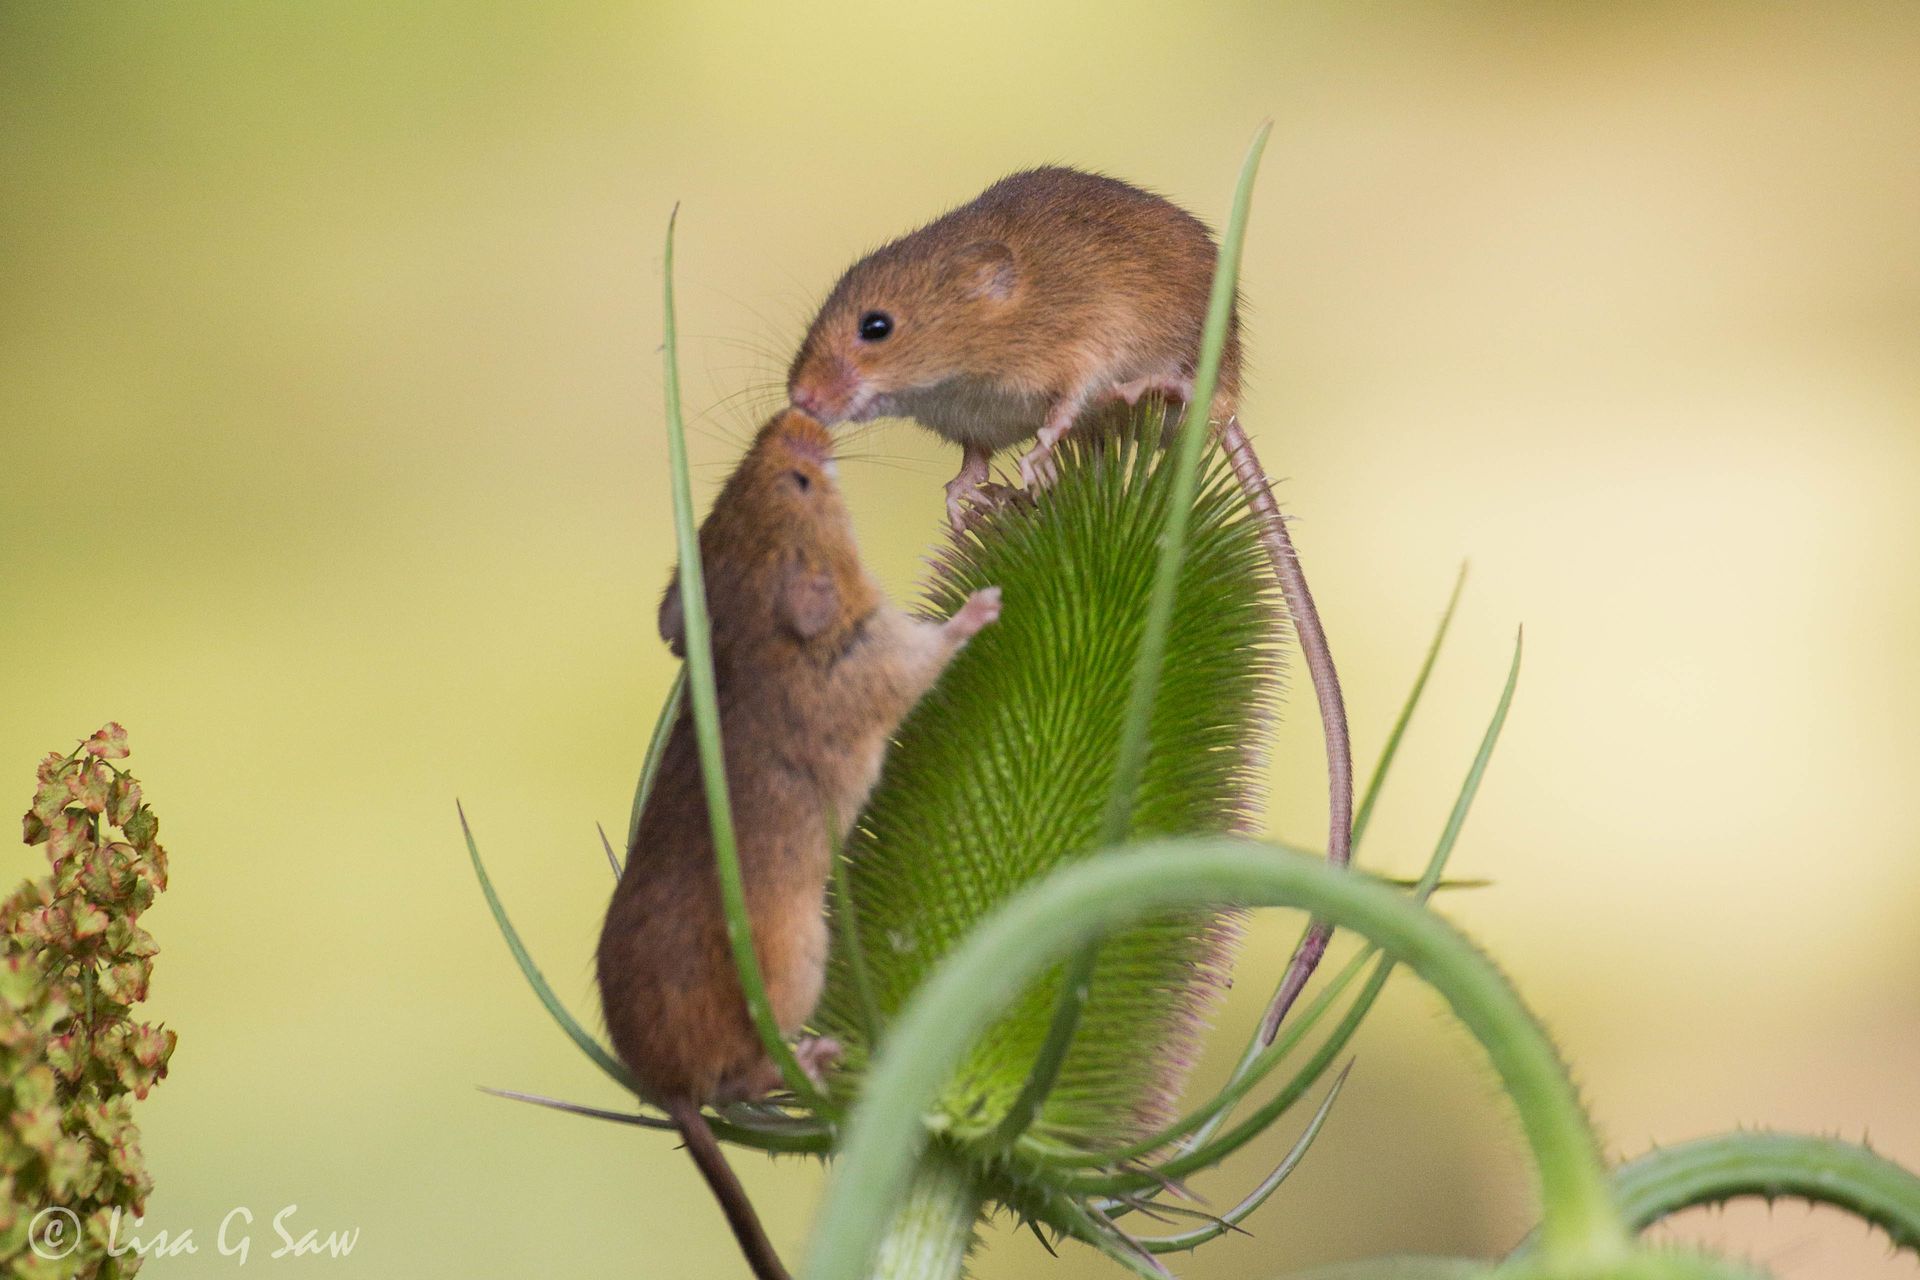 Captive Harvest Mice kissing on a teasel at British Wildlife Centre